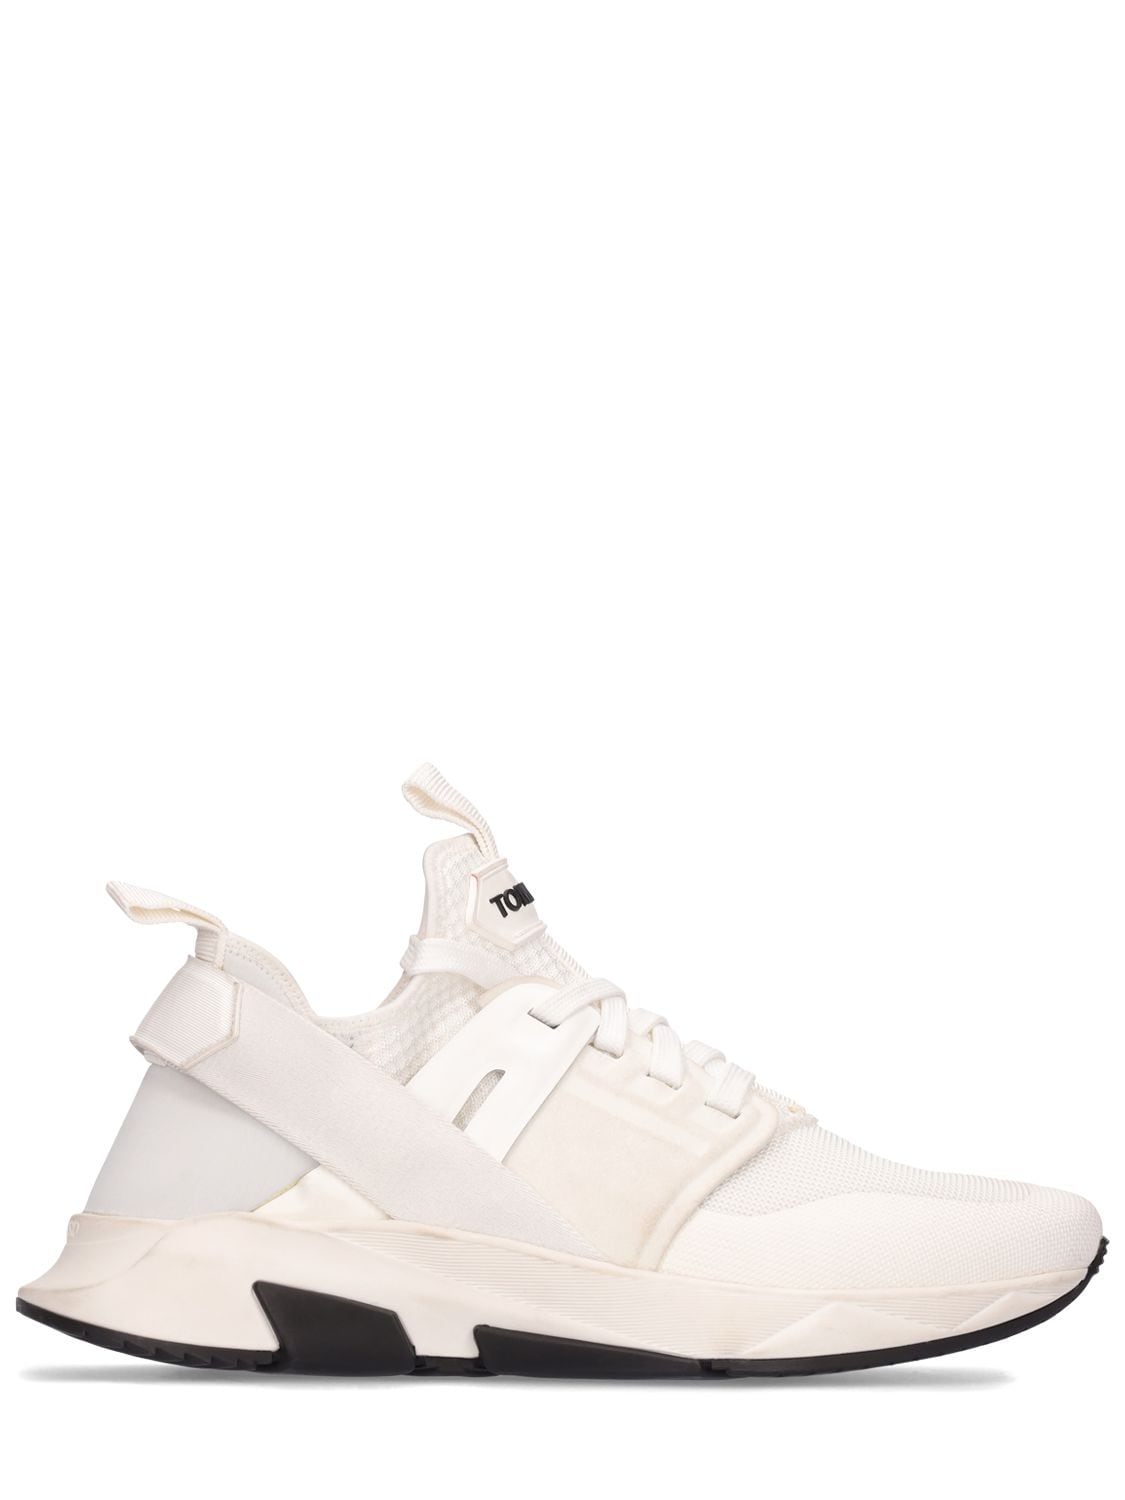 Shop Tom Ford Alcantara Tech & Leather Low Sneakers In White